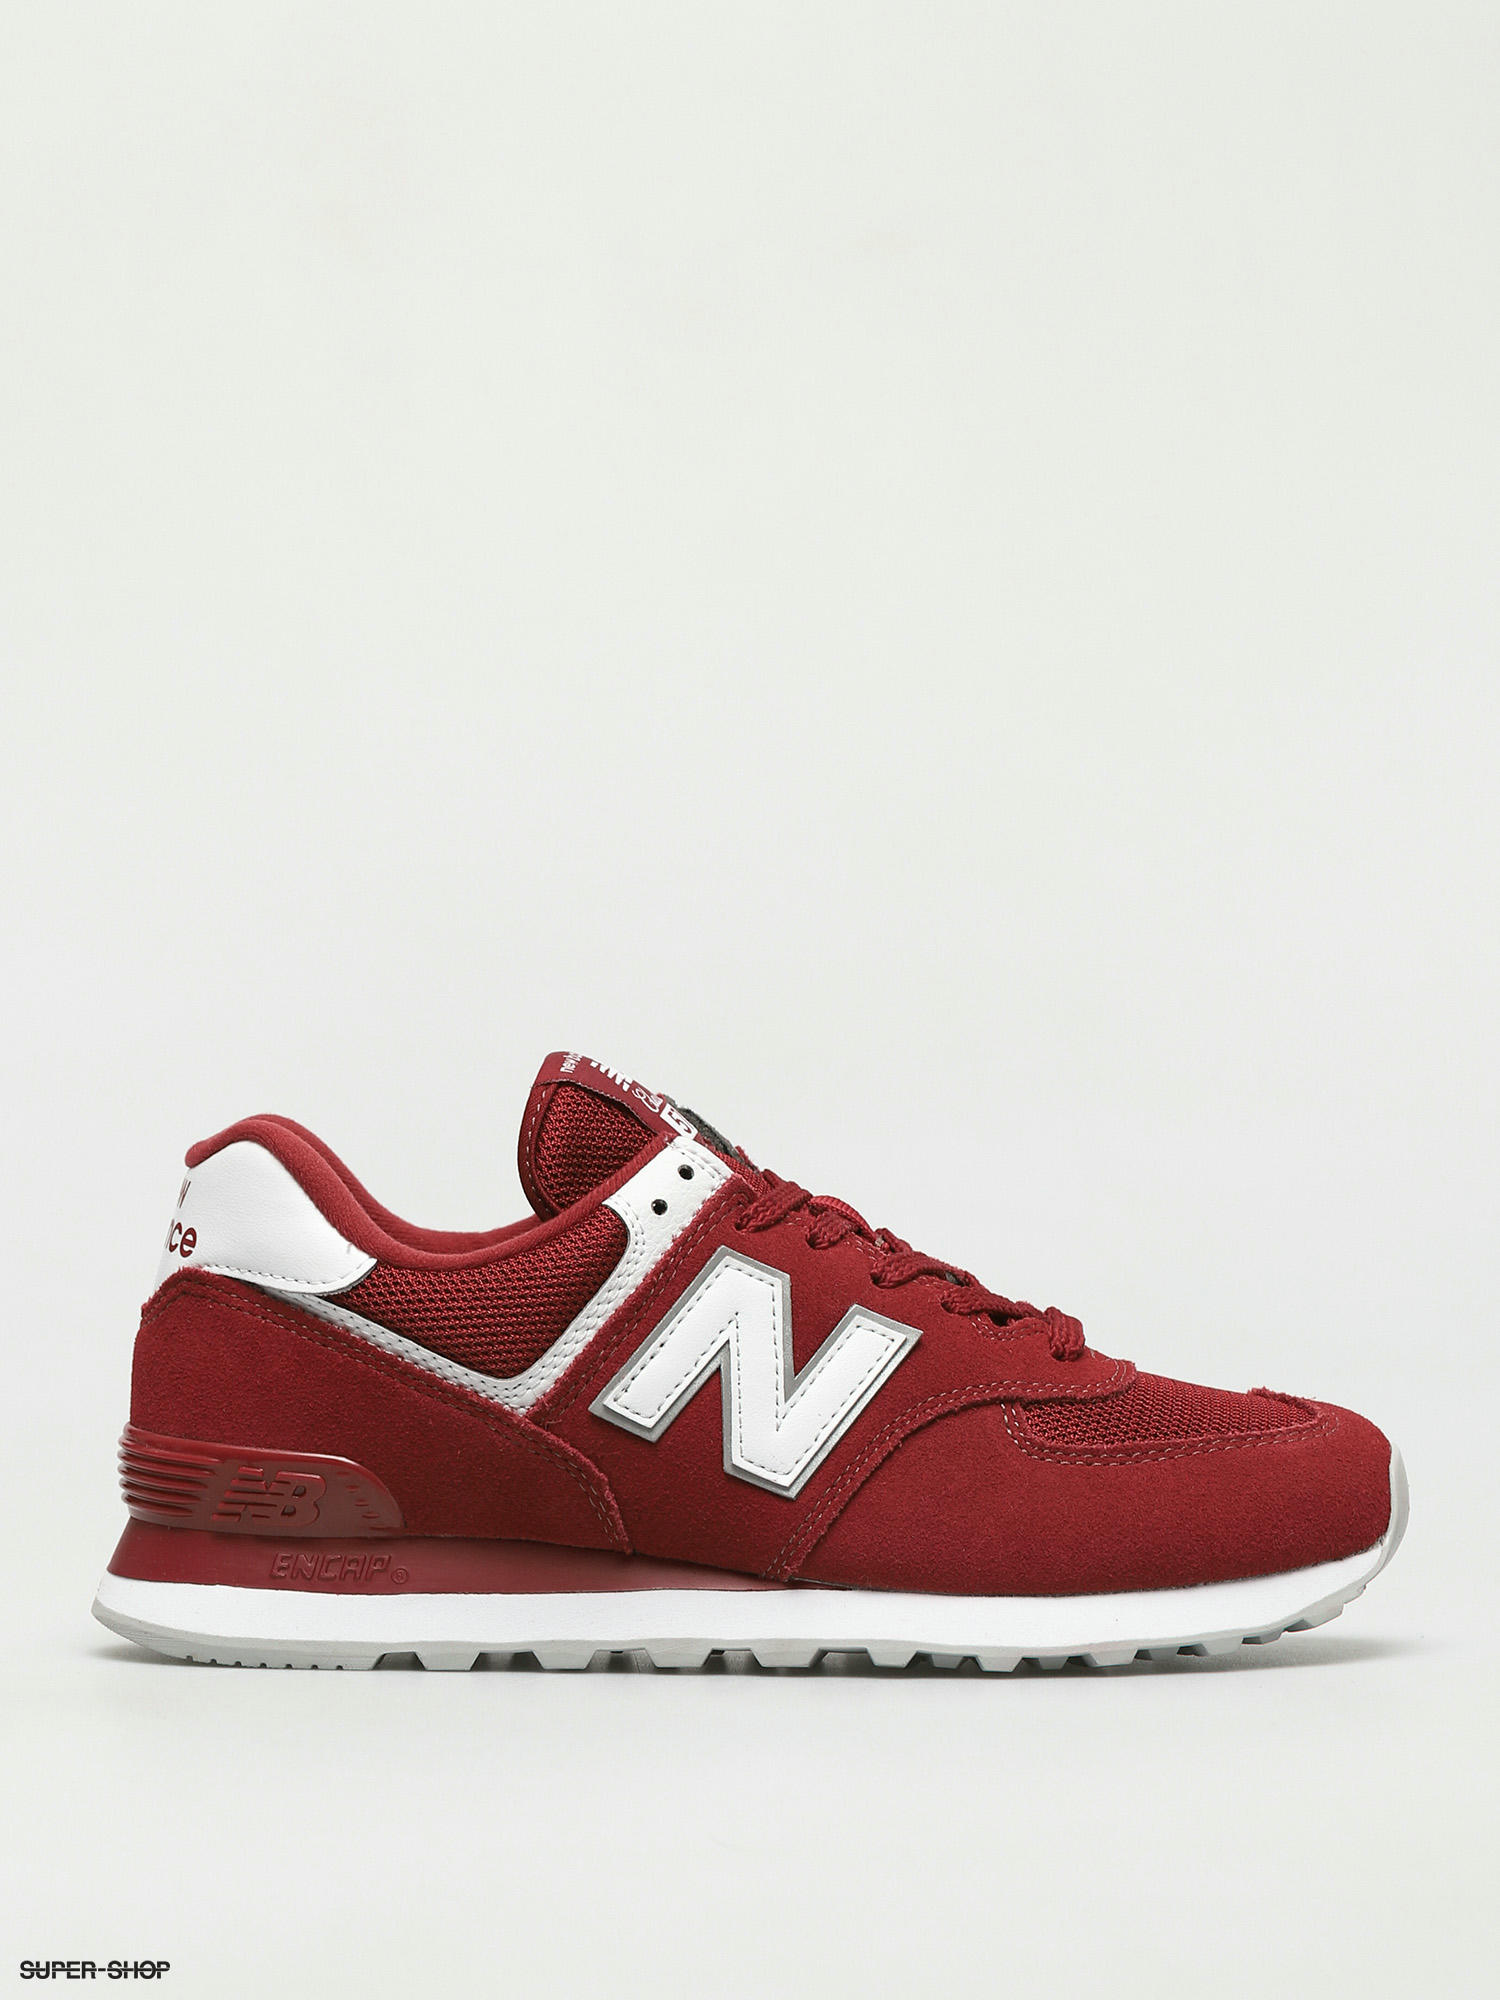 New Balance 574 Shoes (scarlet)